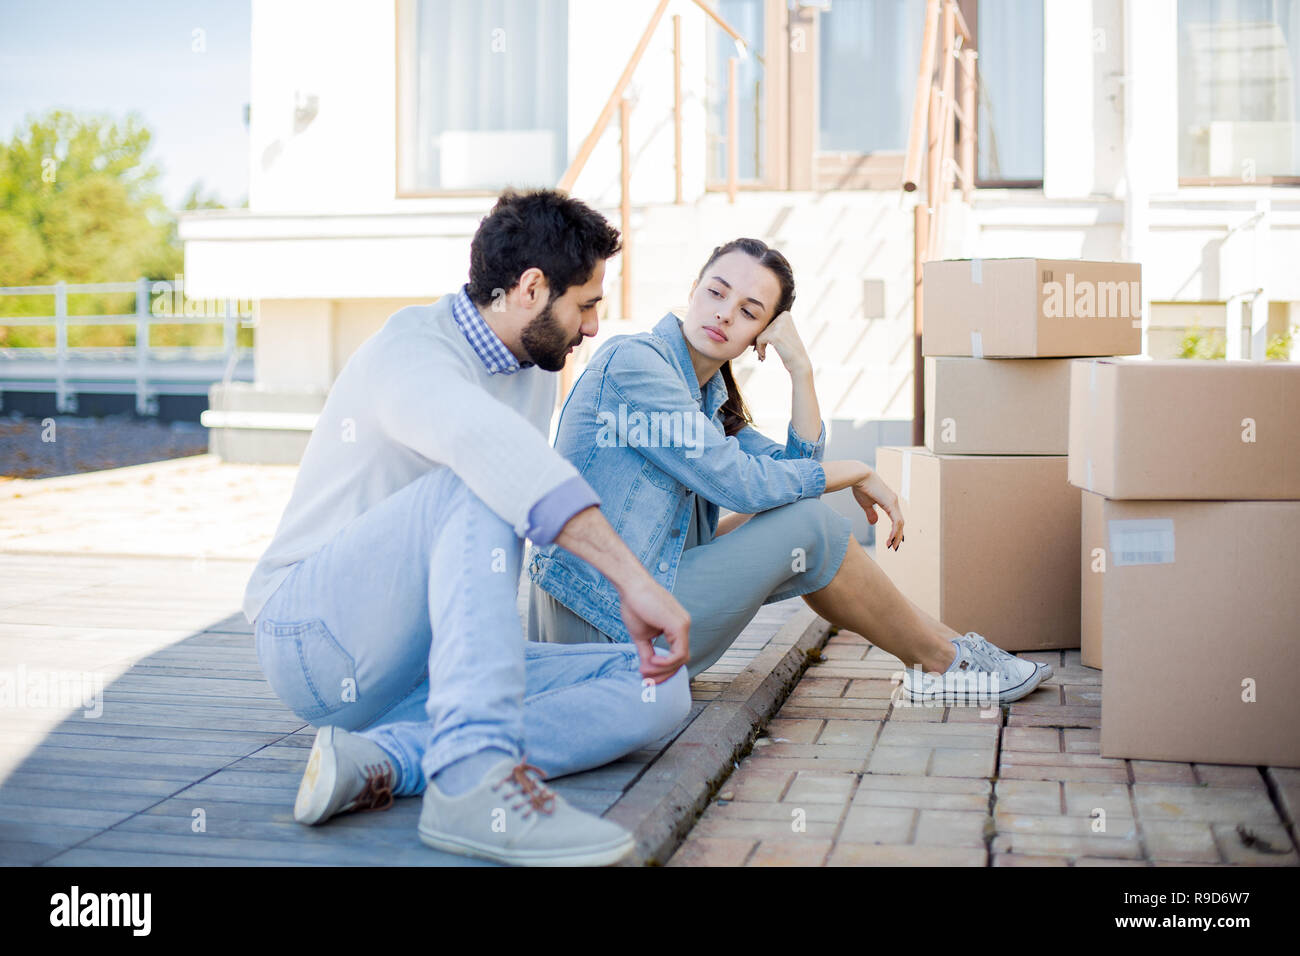 Summer relocation Stock Photo